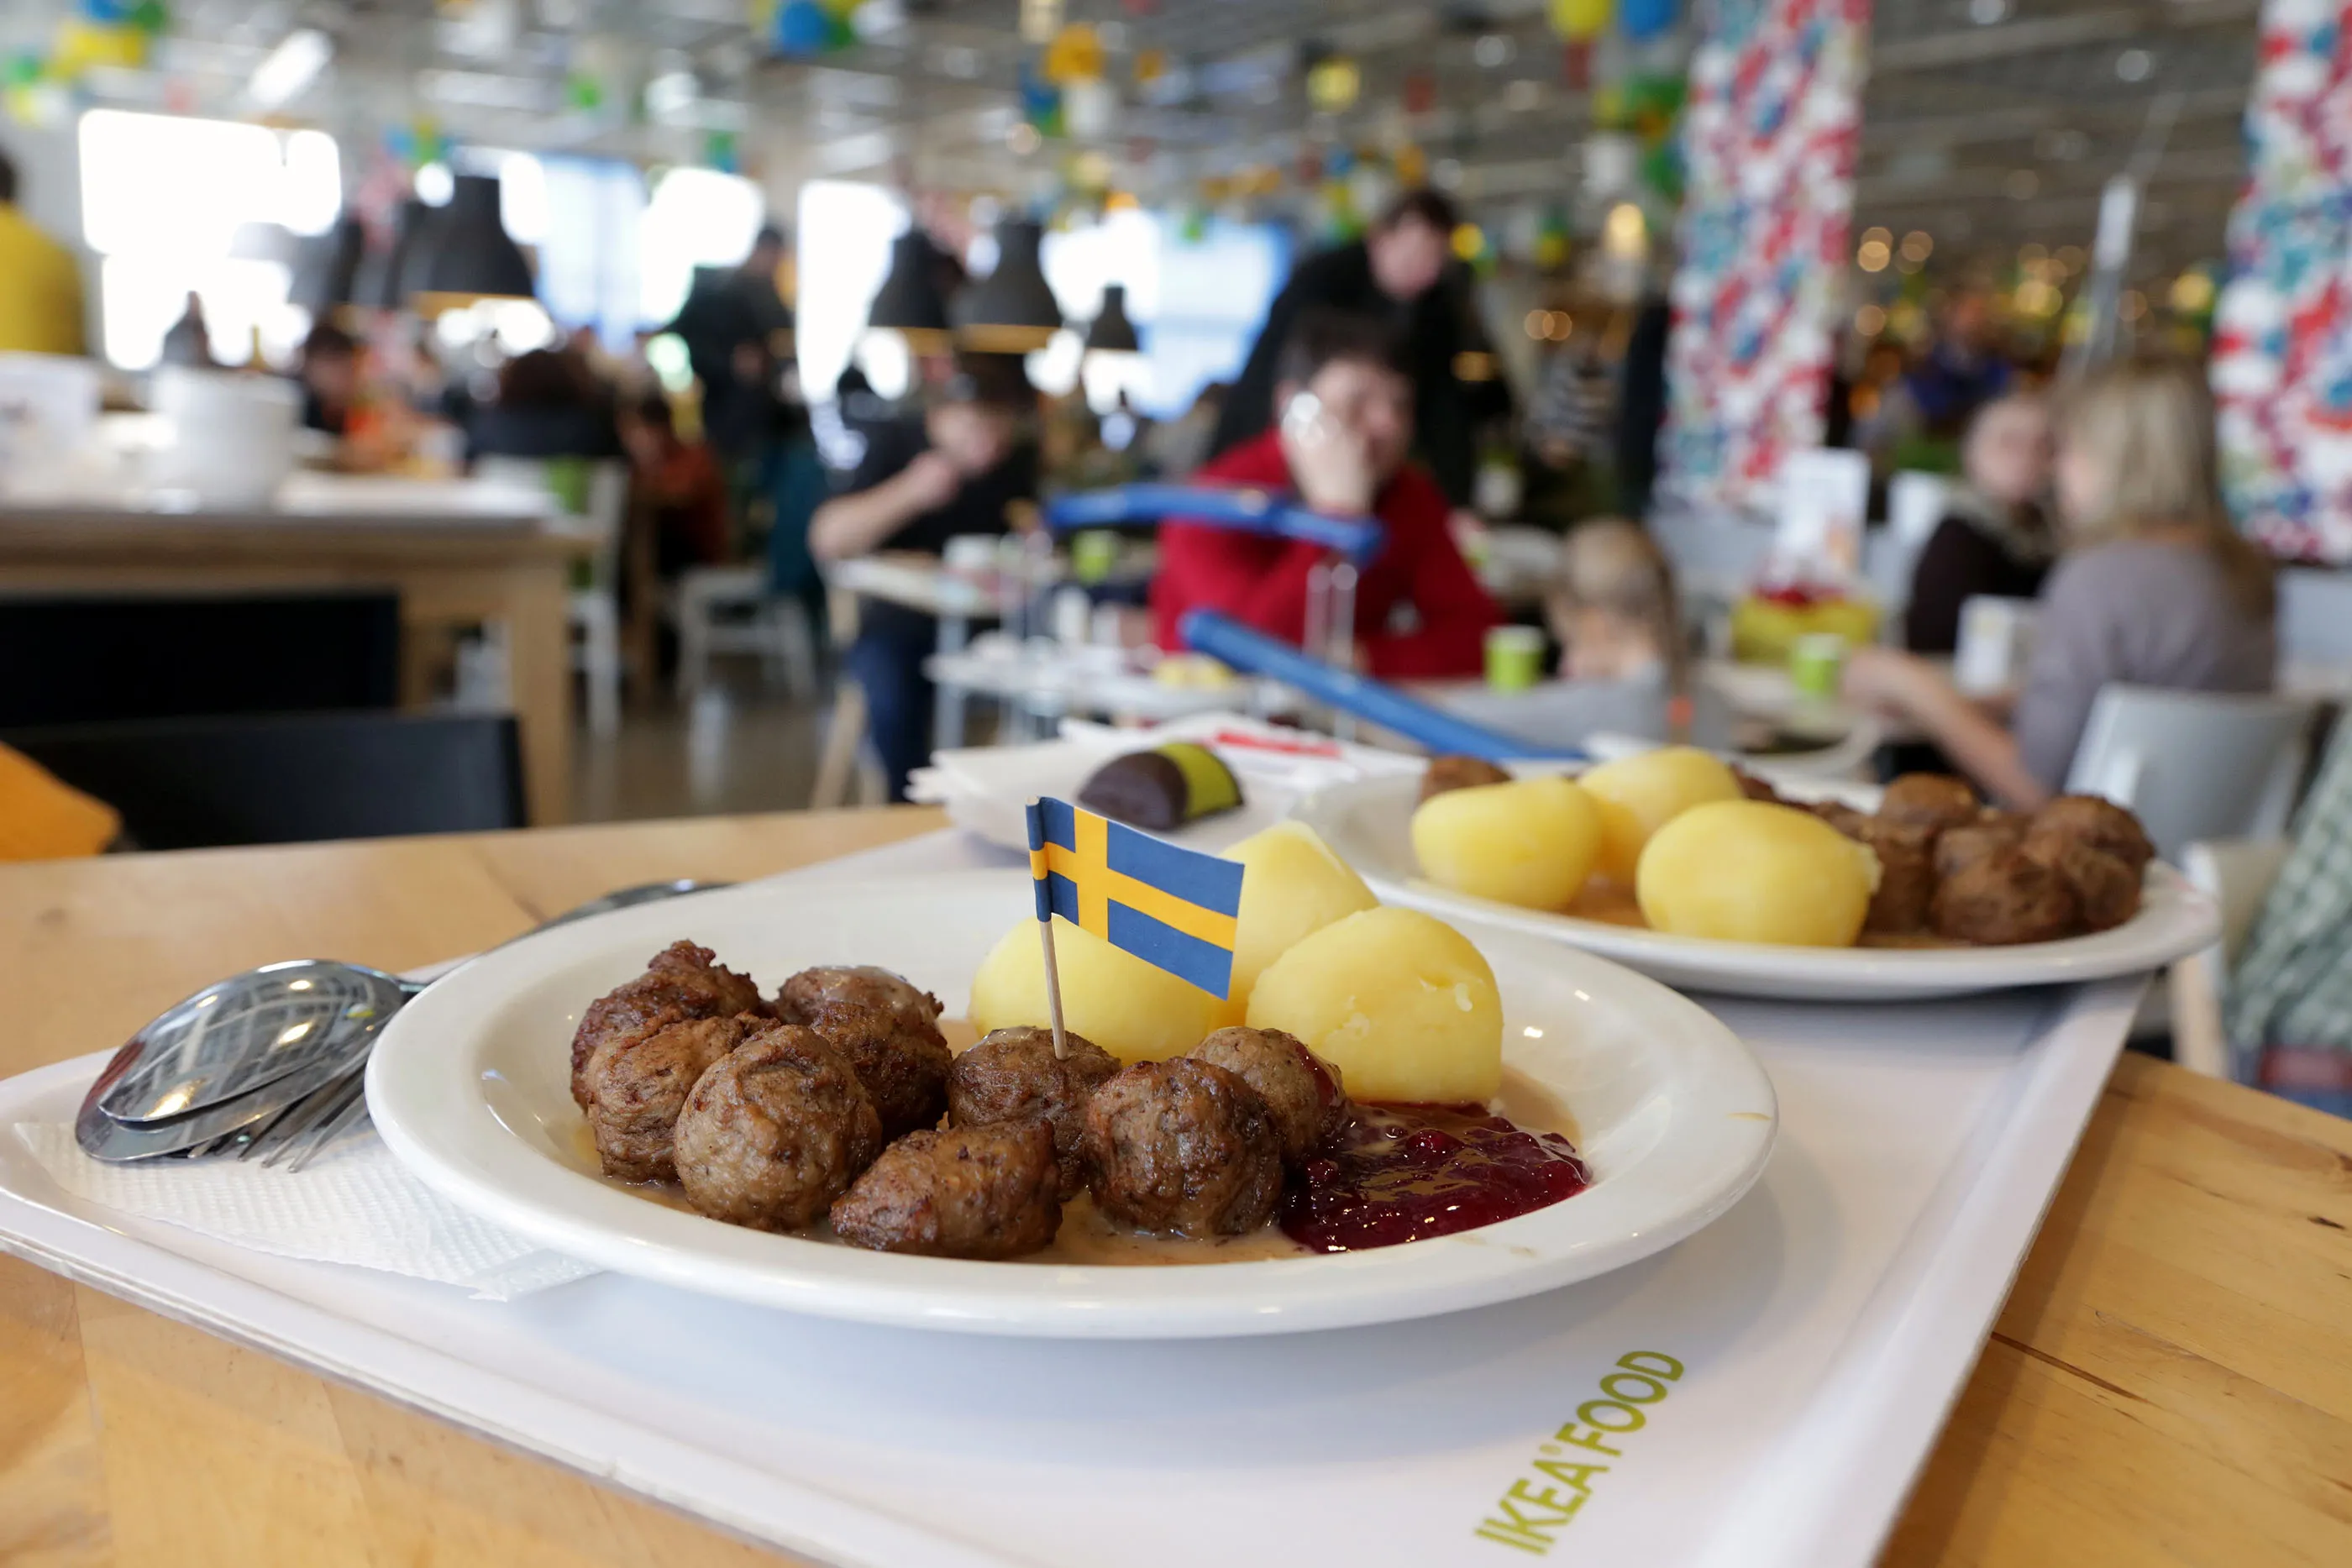 Ikea: What the Best Deals Are at Its Restaurant Money